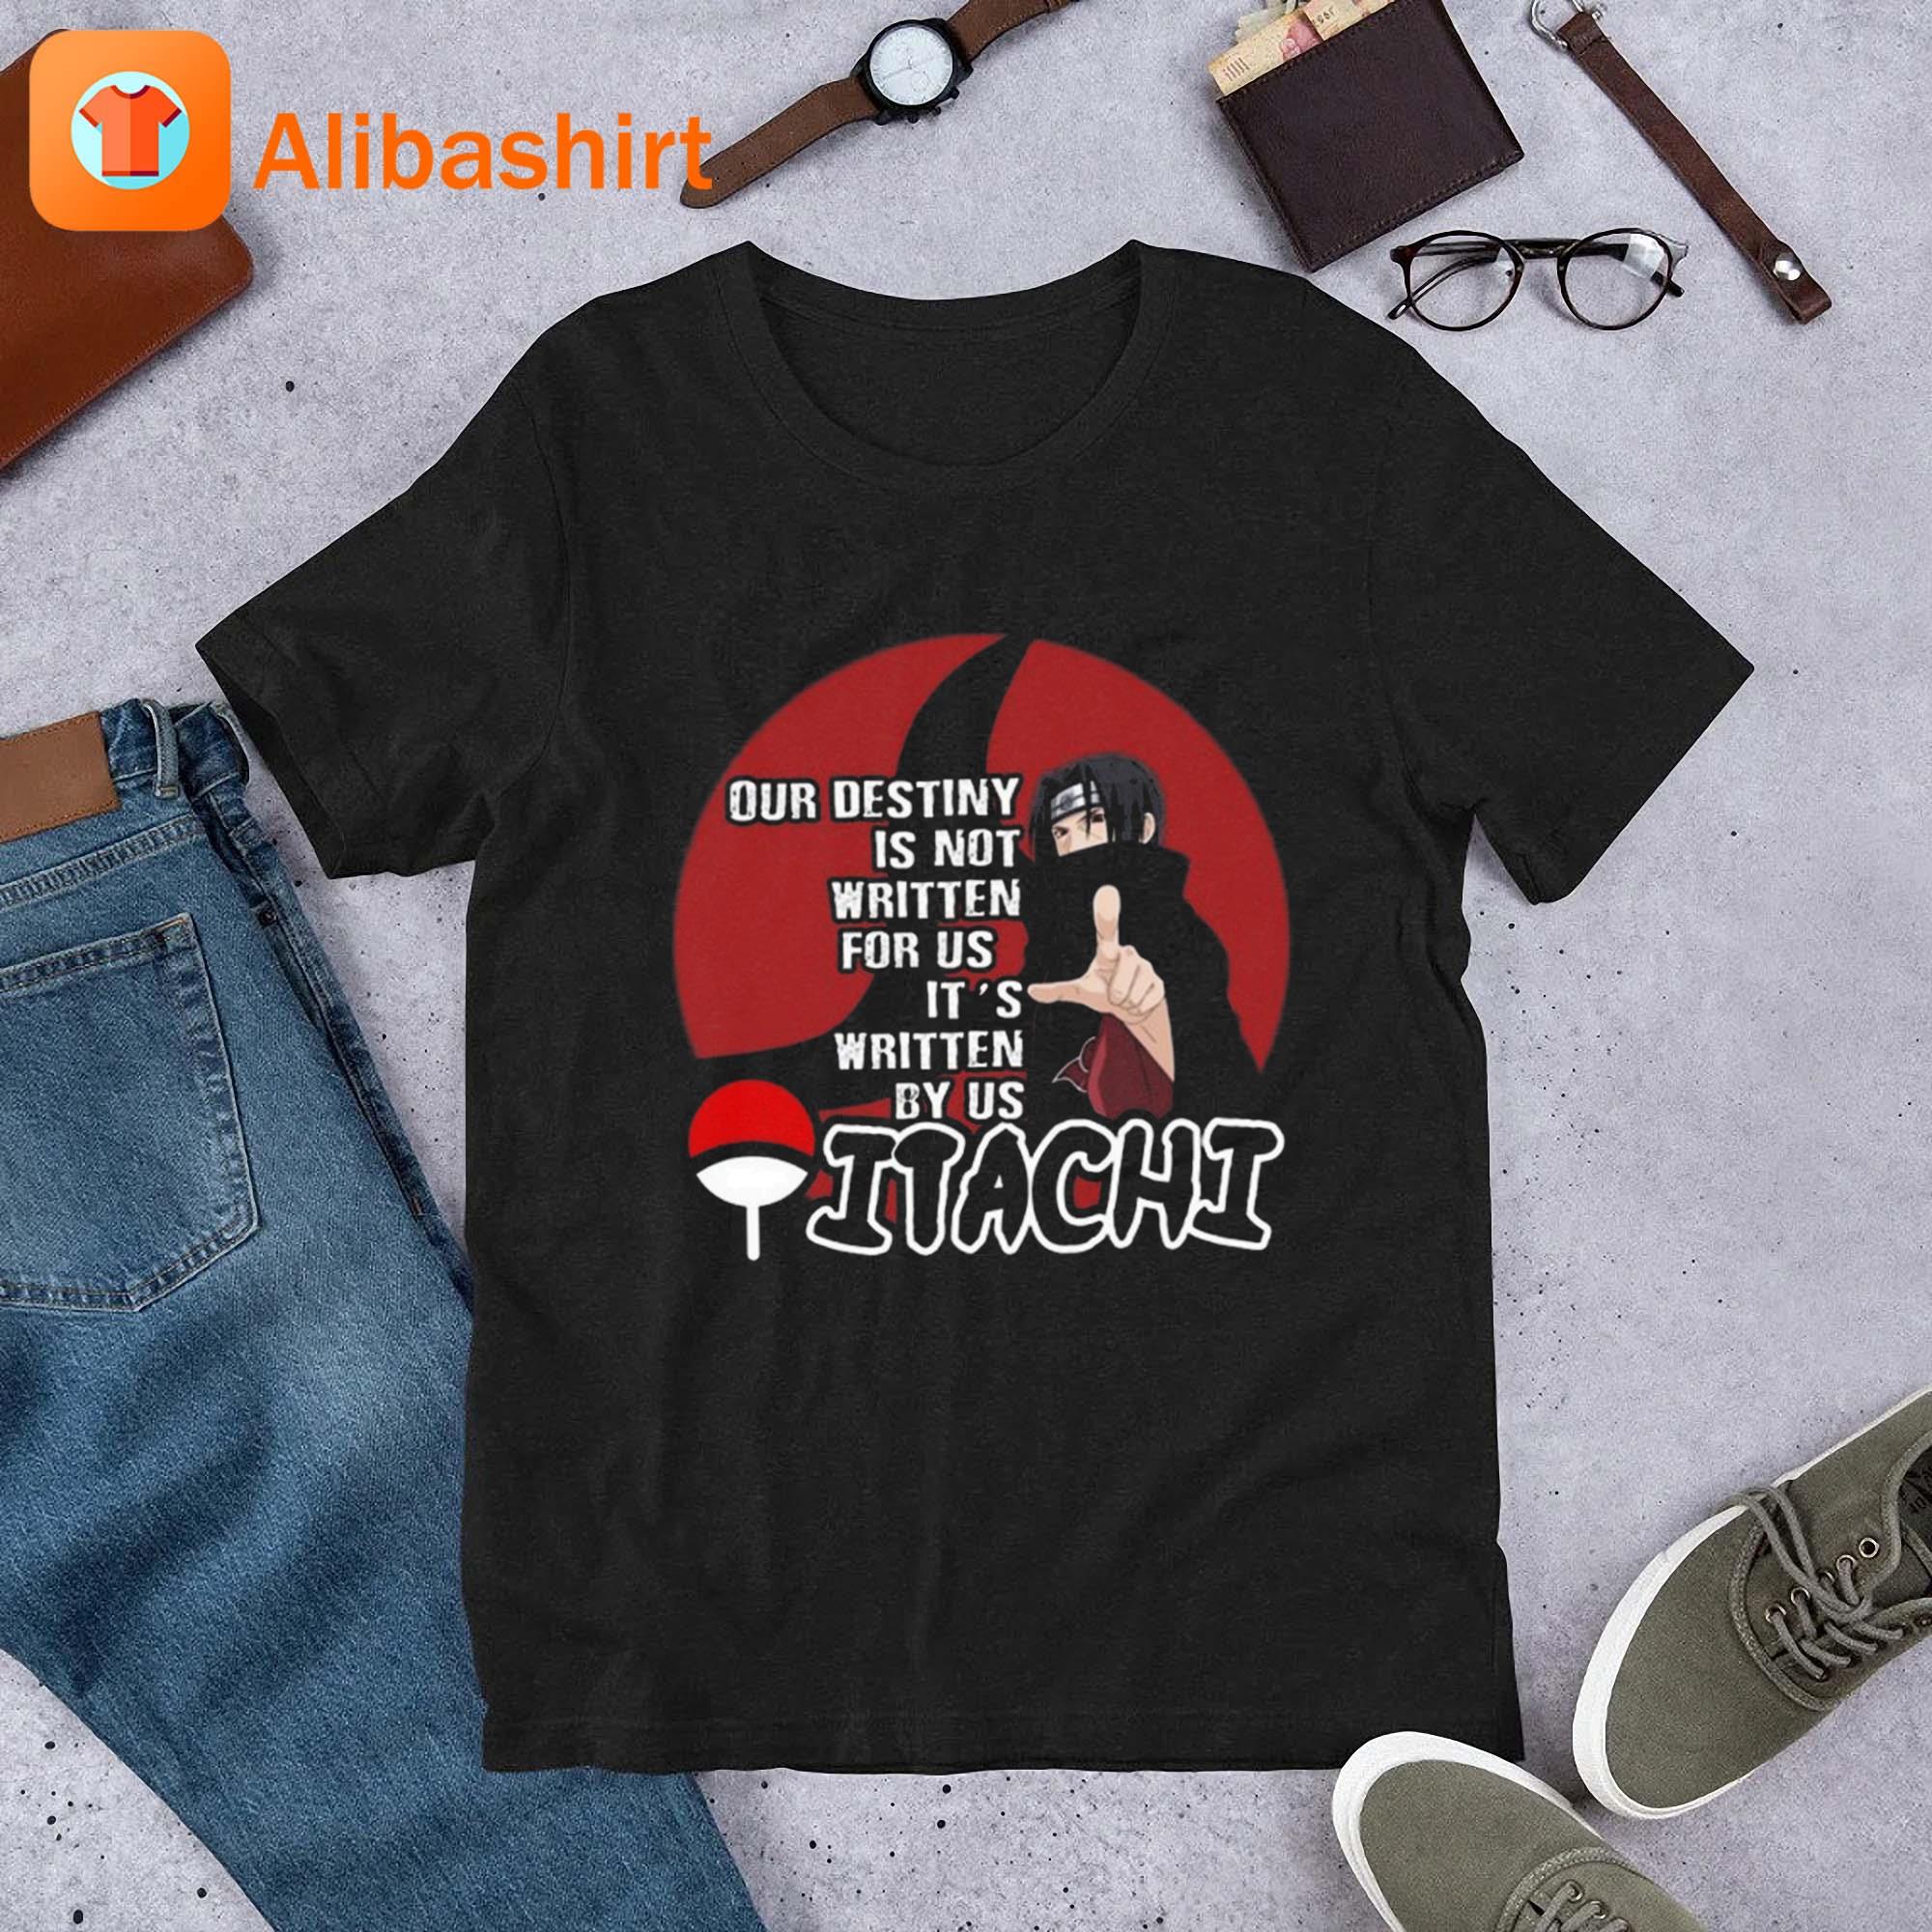 Our Destiny Is Not Written For Us It's Written By Us Itachi Shirt